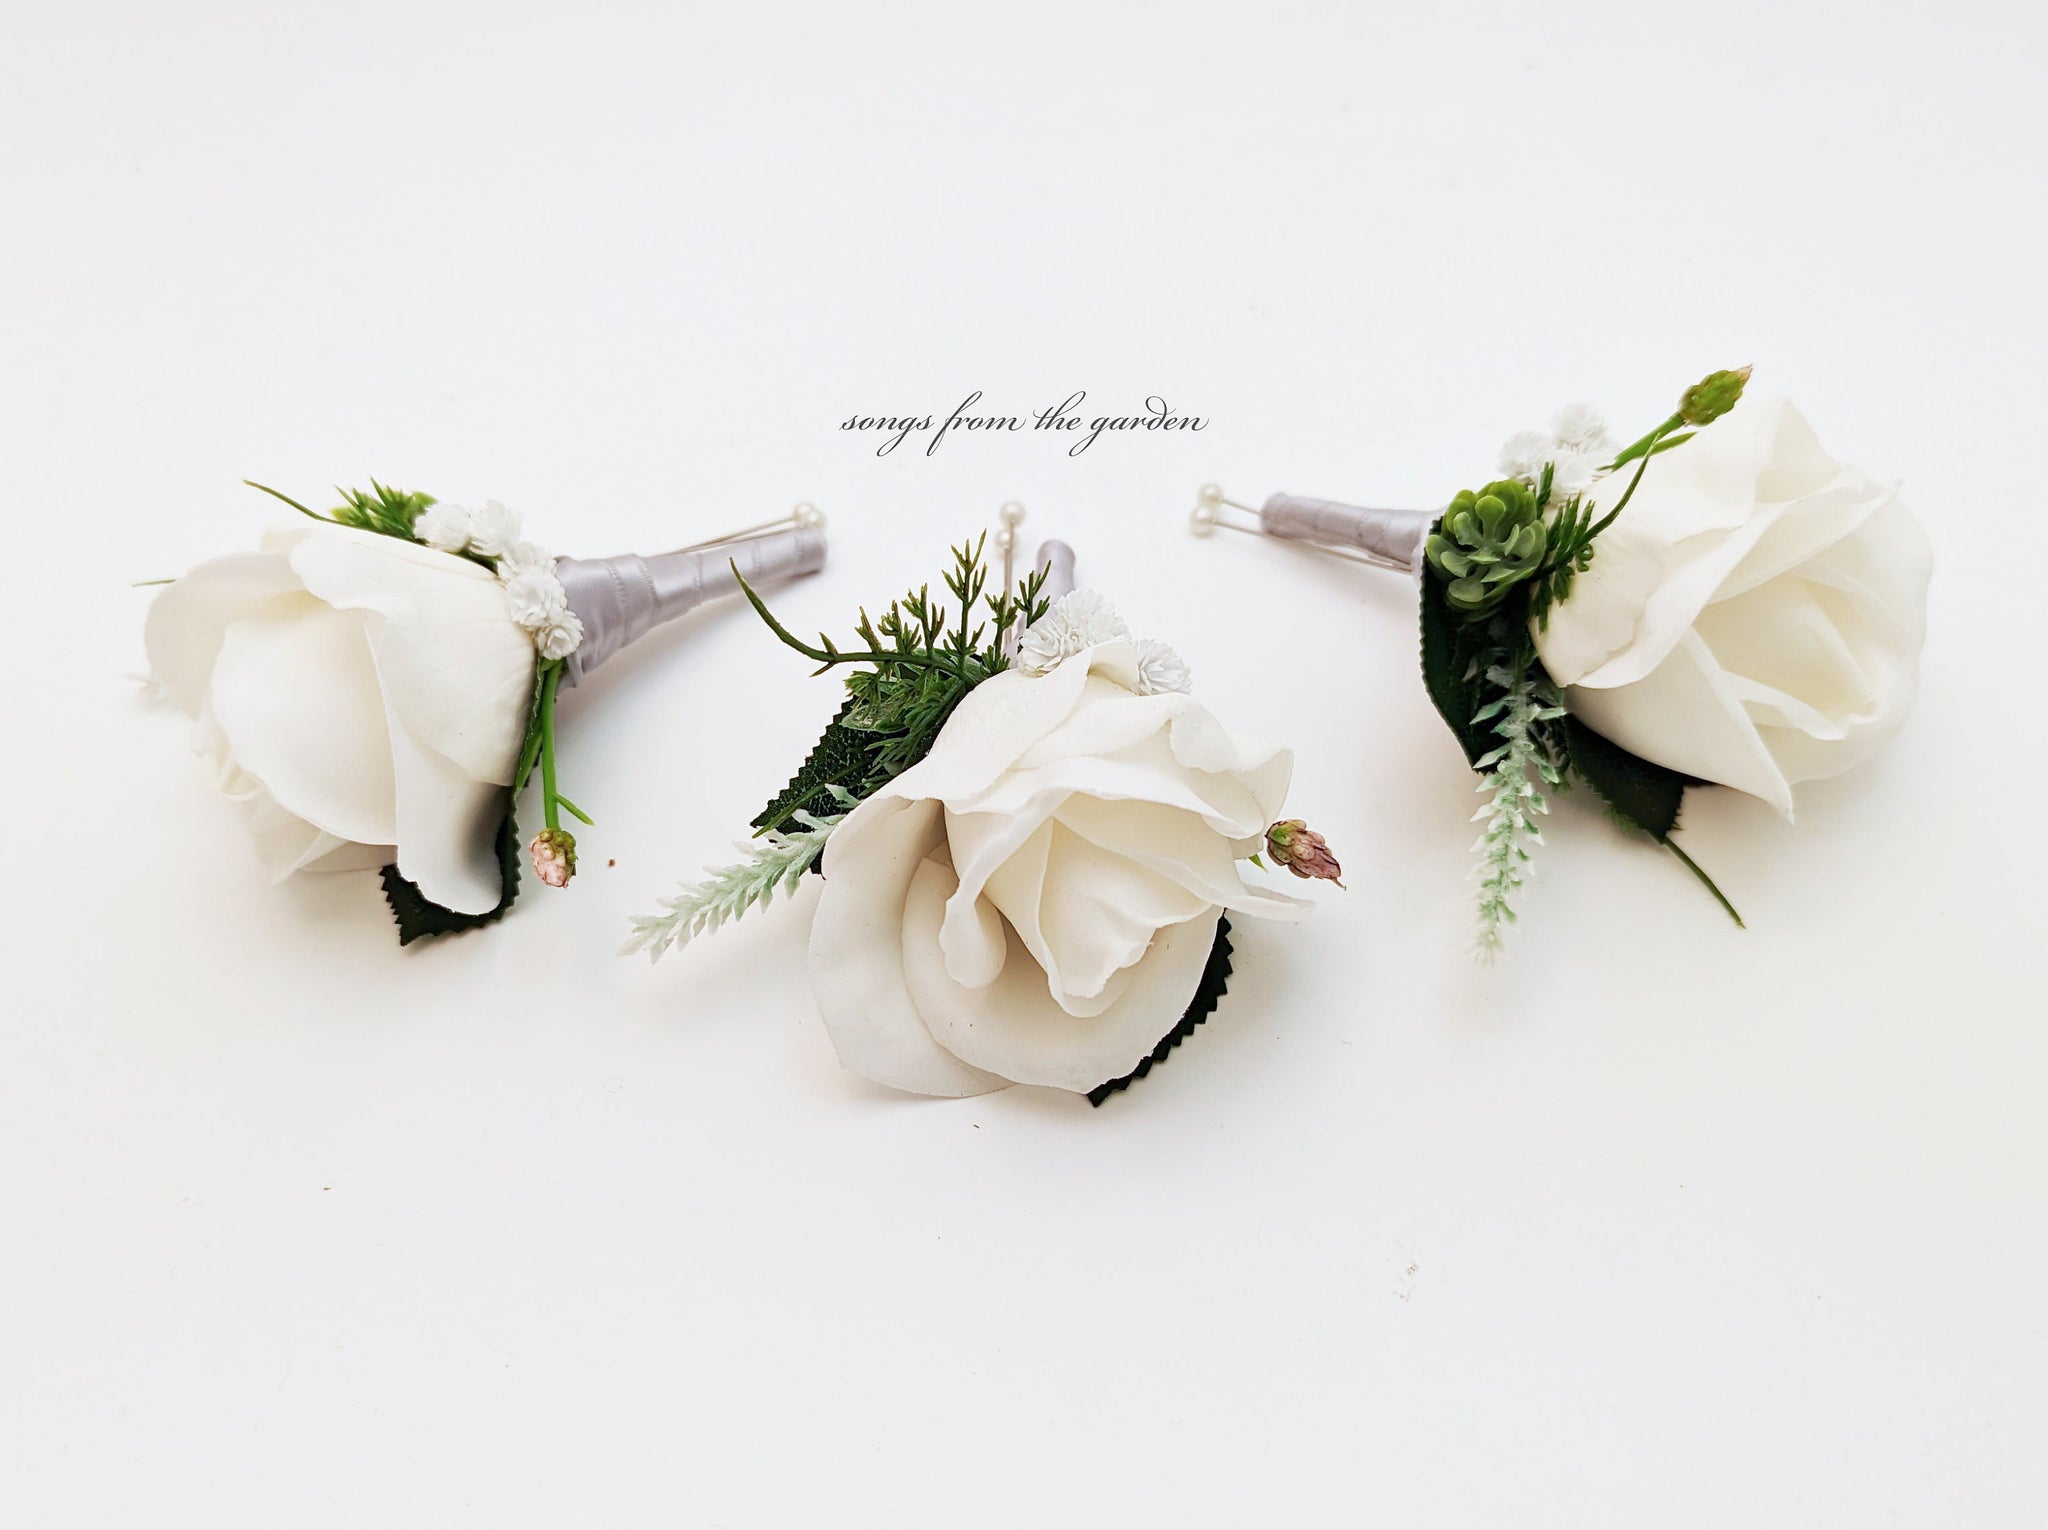 Hops & White Real Touch Rose Boutonniere Buttonhole Groom Groomsmen - Customize For Your Wedding Colors - Wedding Prom Boutonniere